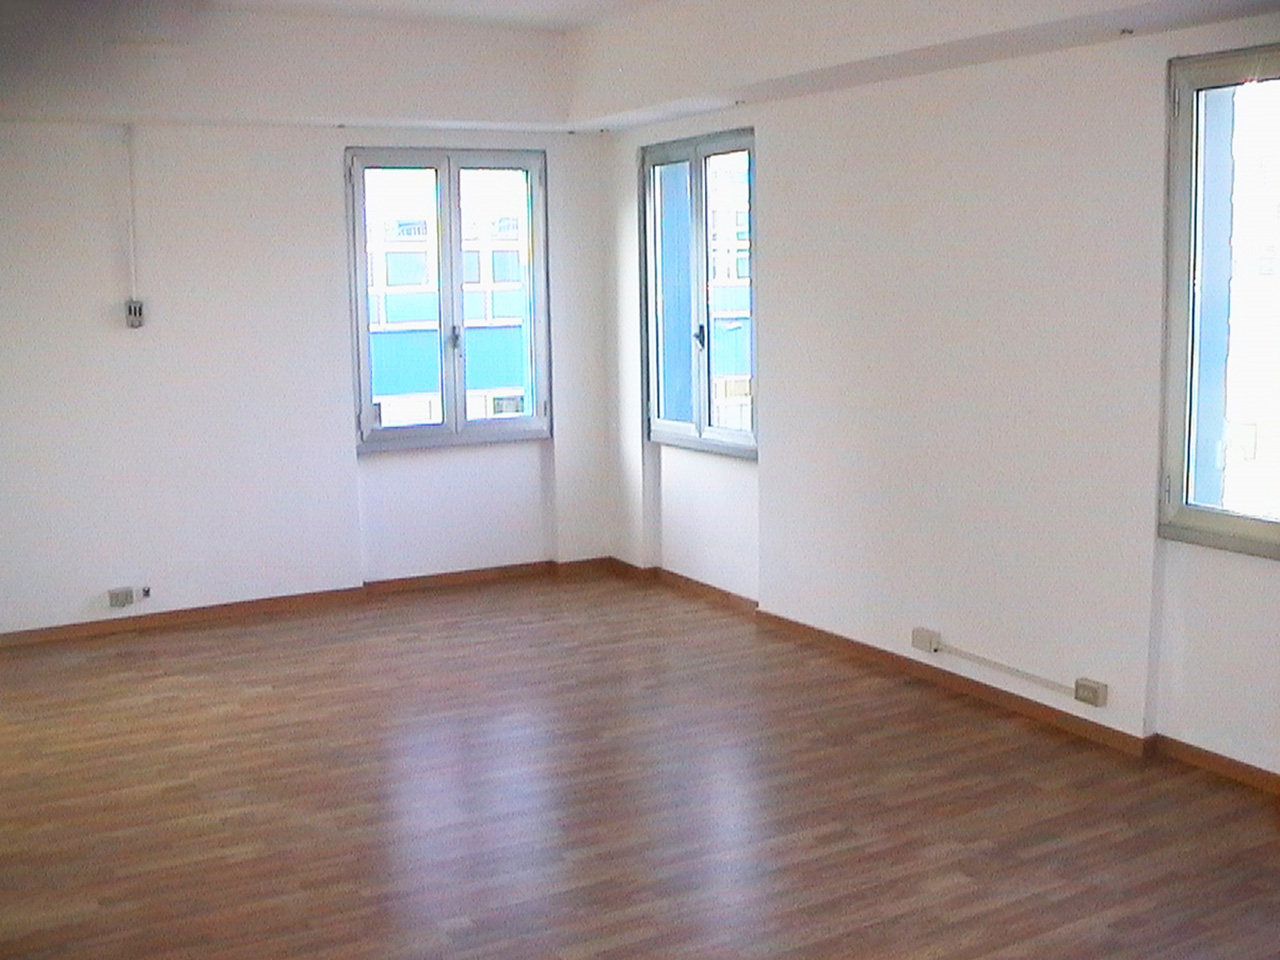 2nd office room in the 220 sq m (2368 sq ft) office